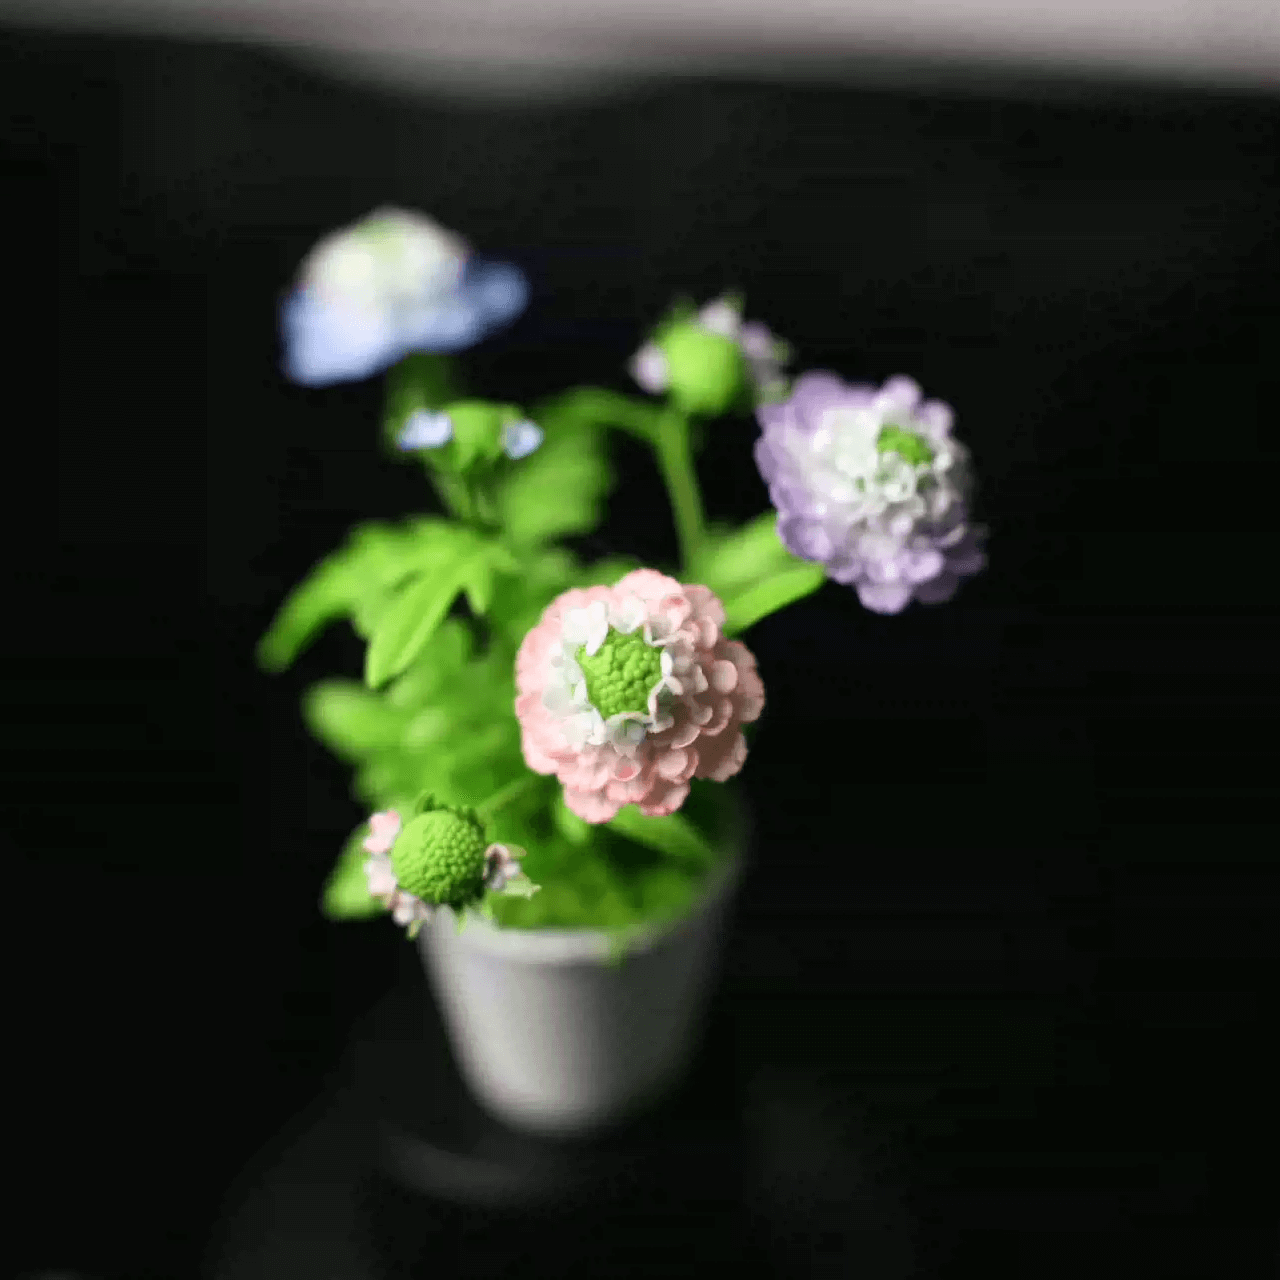 Scabiosa atropurpurea (syn. Sixalix atropurpurea), the mourningbride, mournful widow, pincushion flower, or sweet scabious, is an ornamental plant of the genus Scabiosa in the family Caprifoliaceae. It is native to southern Europe.  Material: Handmade from Clay